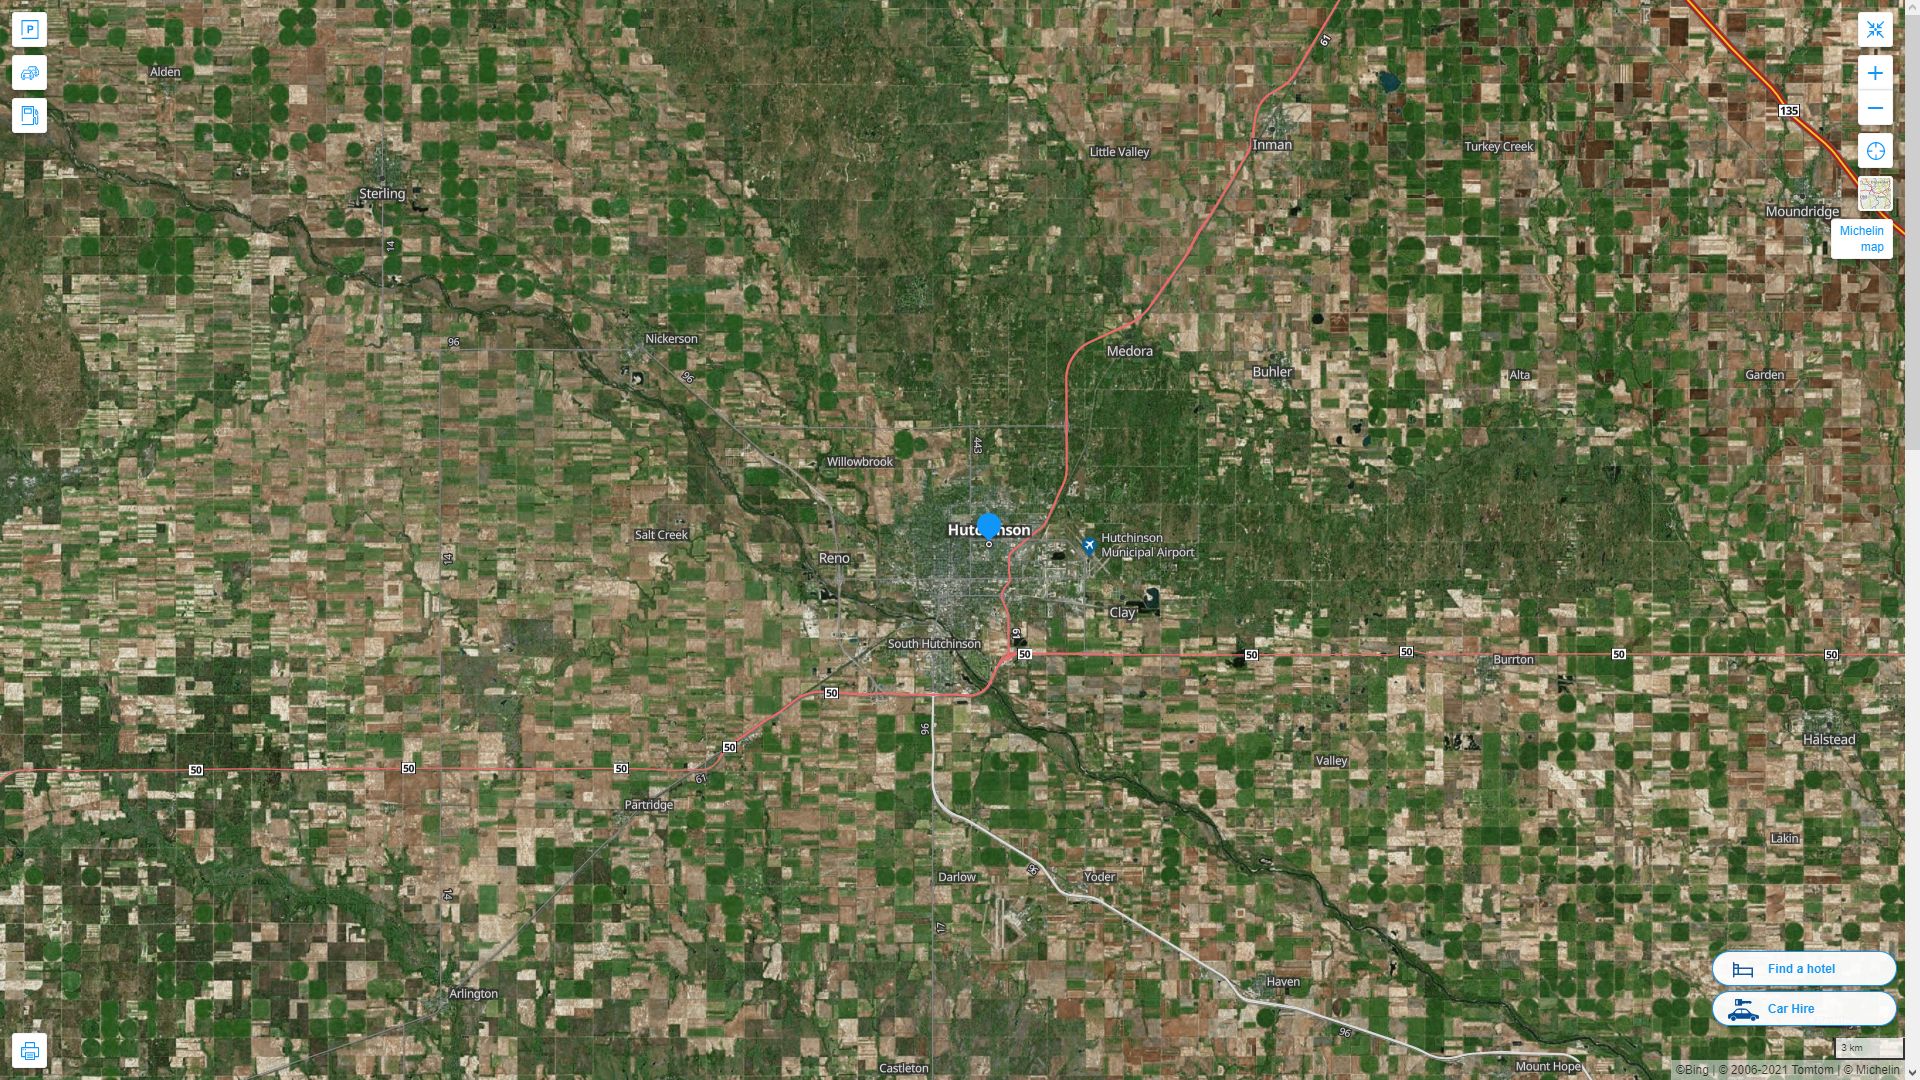 Hutchinson Kansas Highway and Road Map with Satellite View